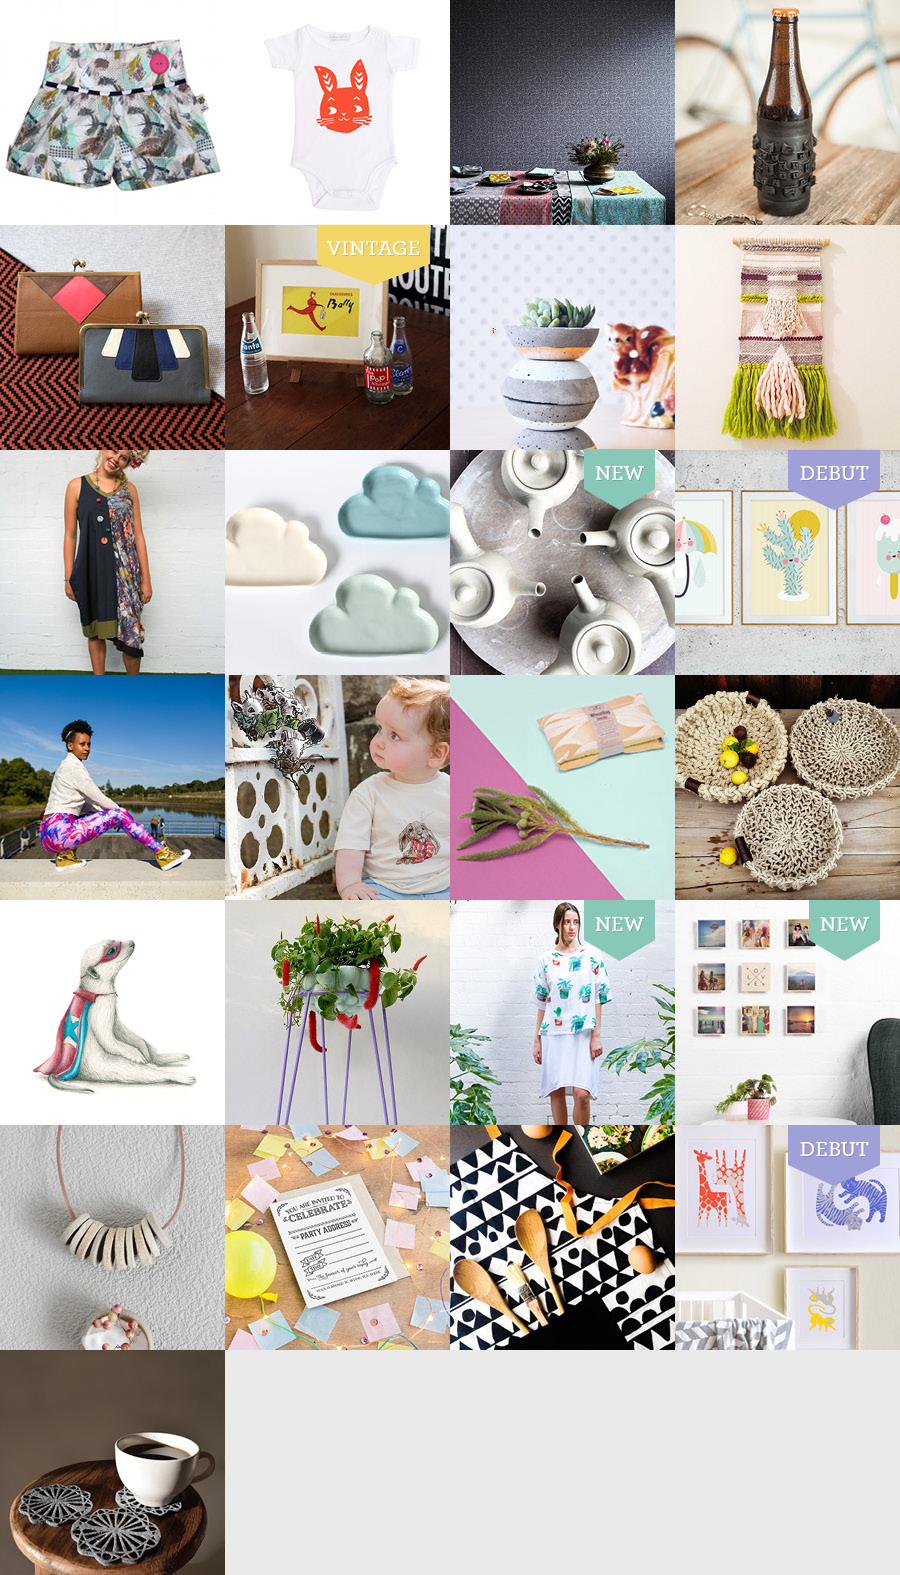 The Finders Keepers Melbourne SS15 Market Line-up Art and Design